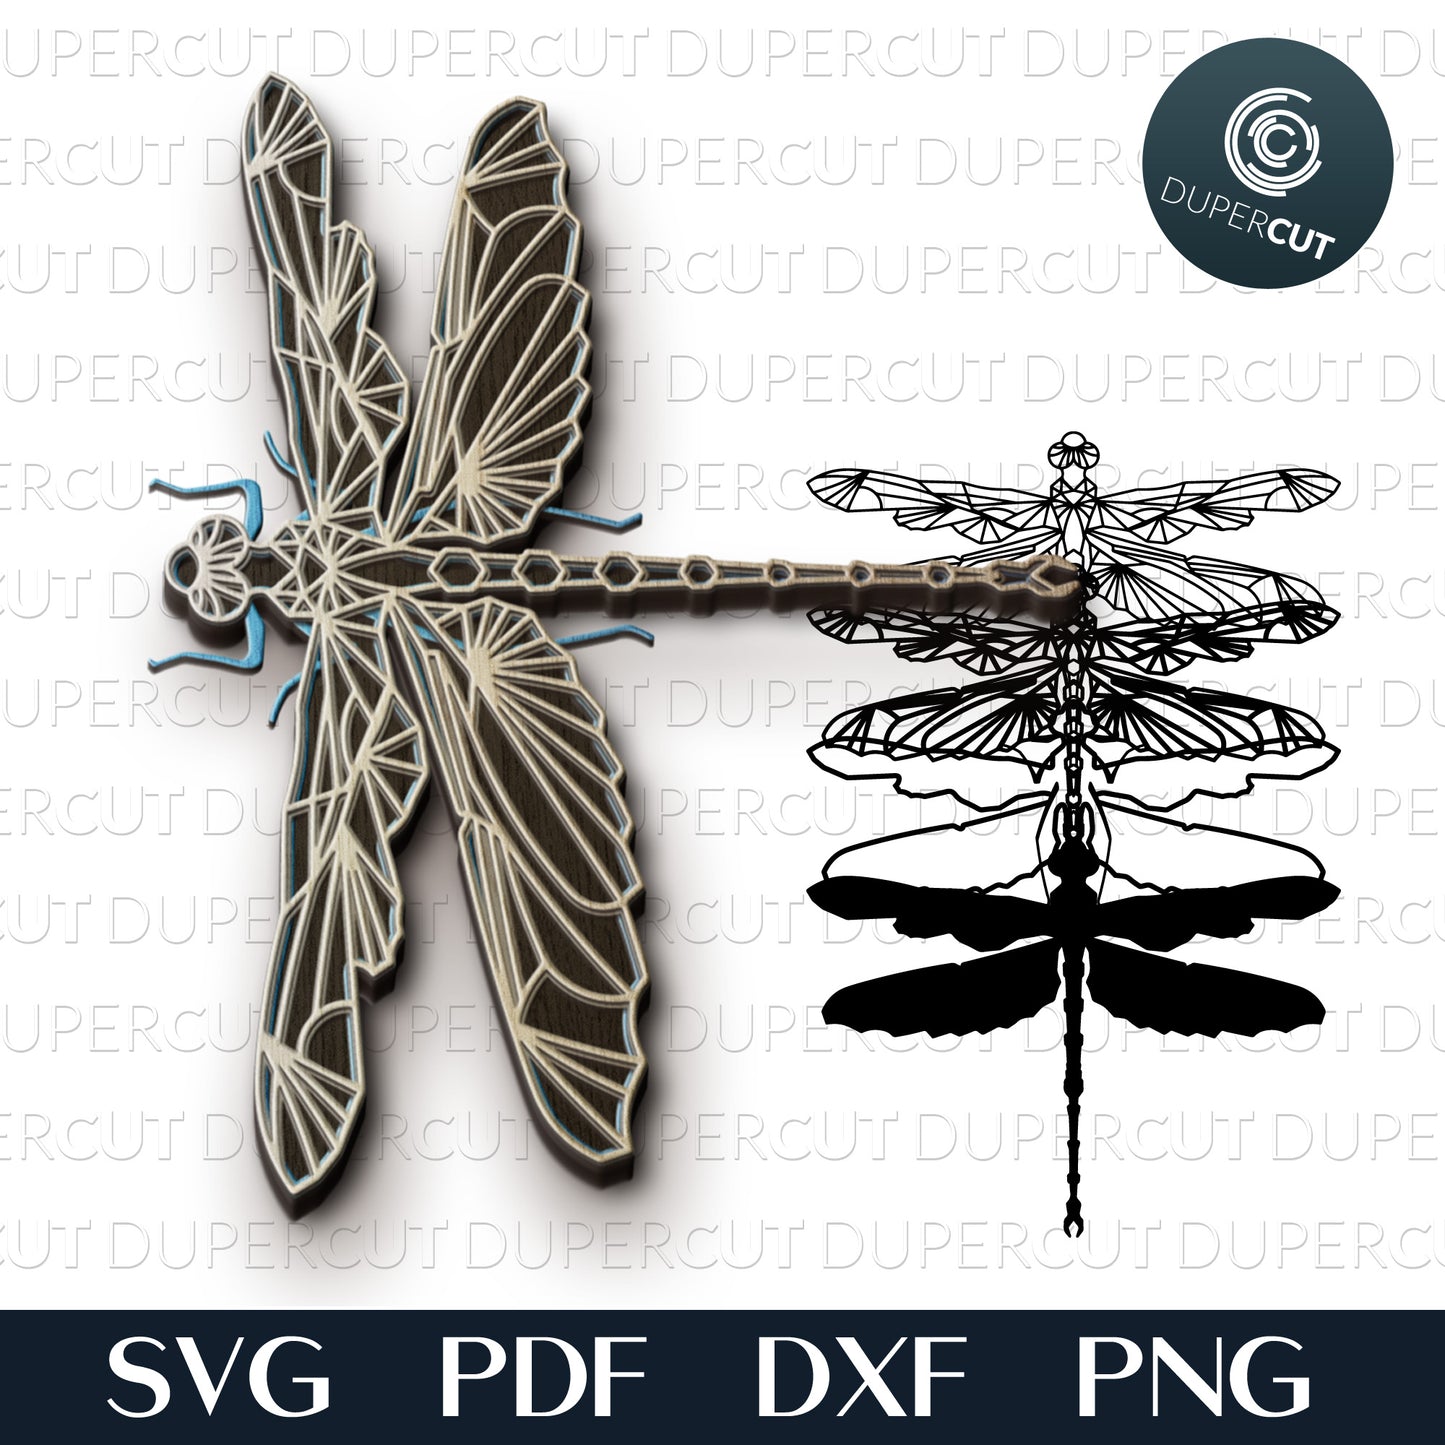 Dragonfly layered laser files, SVG PNG DXF files for cutting, laser engraving, scrapbooking. For use with Cricut, Glowforge, Silhouette, CNC machines.